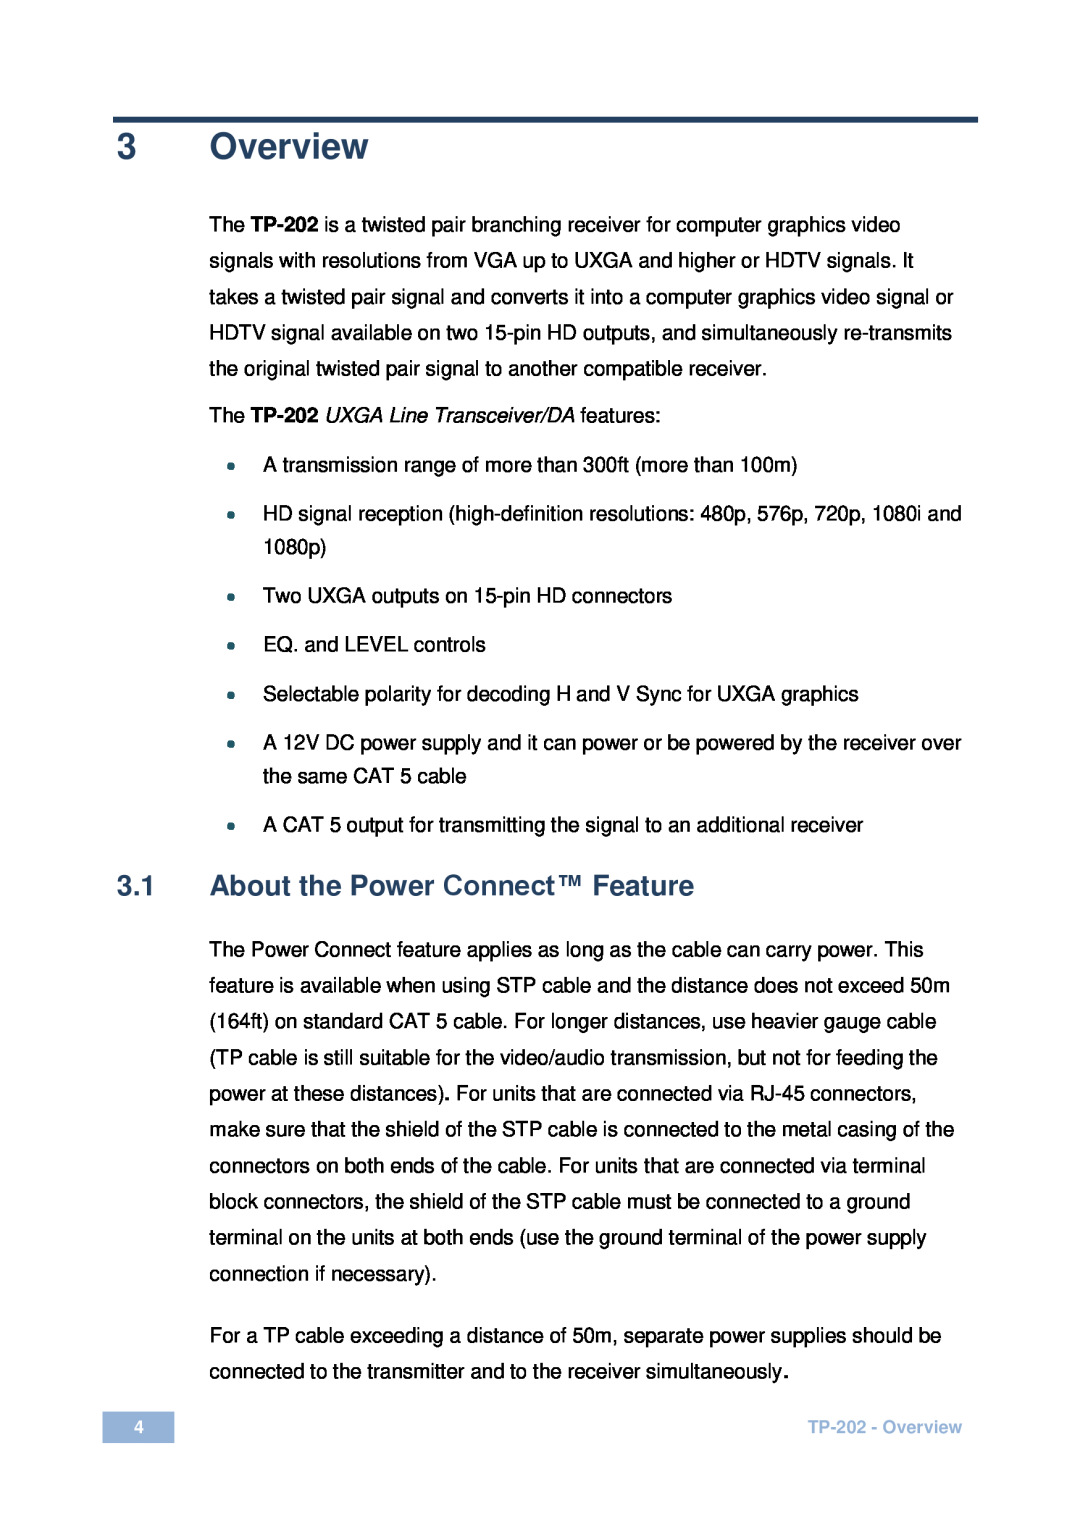 Kramer Electronics Overview, 3.1About the Power Connect Feature, The TP-202 UXGA Line Transceiver/DA features 